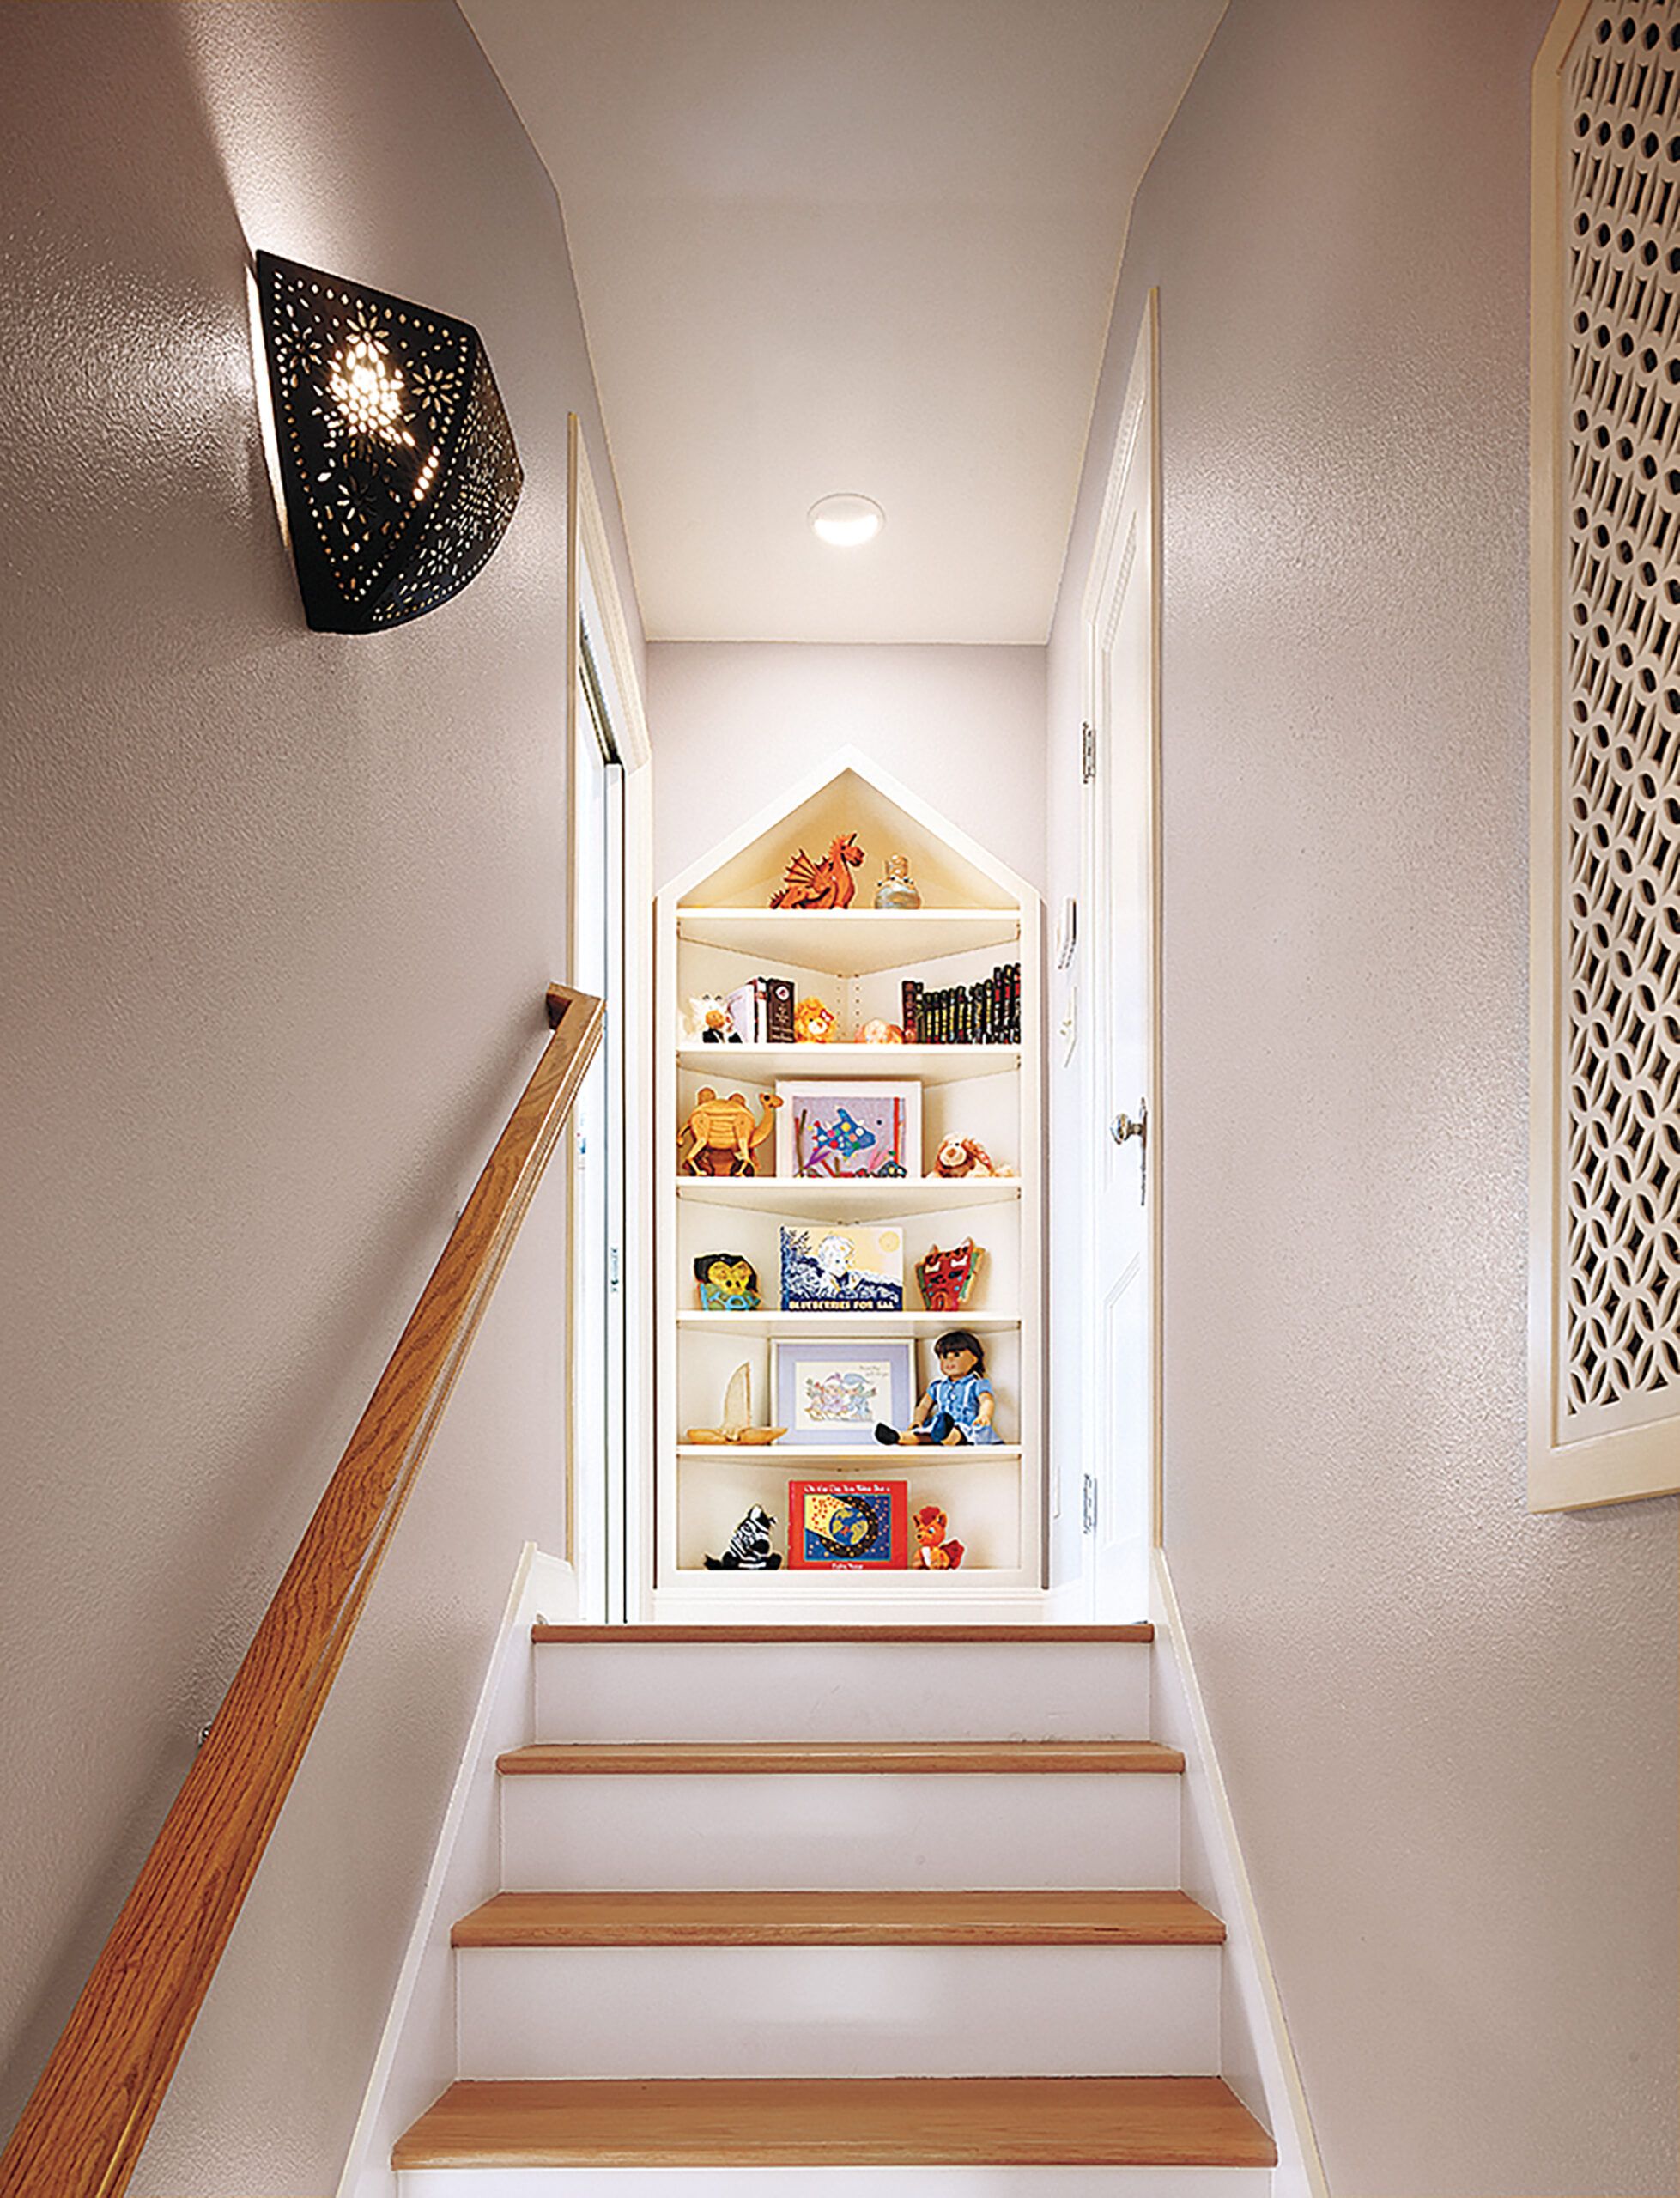 12 Best Attic Storage Ideas - How to Add Storage to an Unfinished